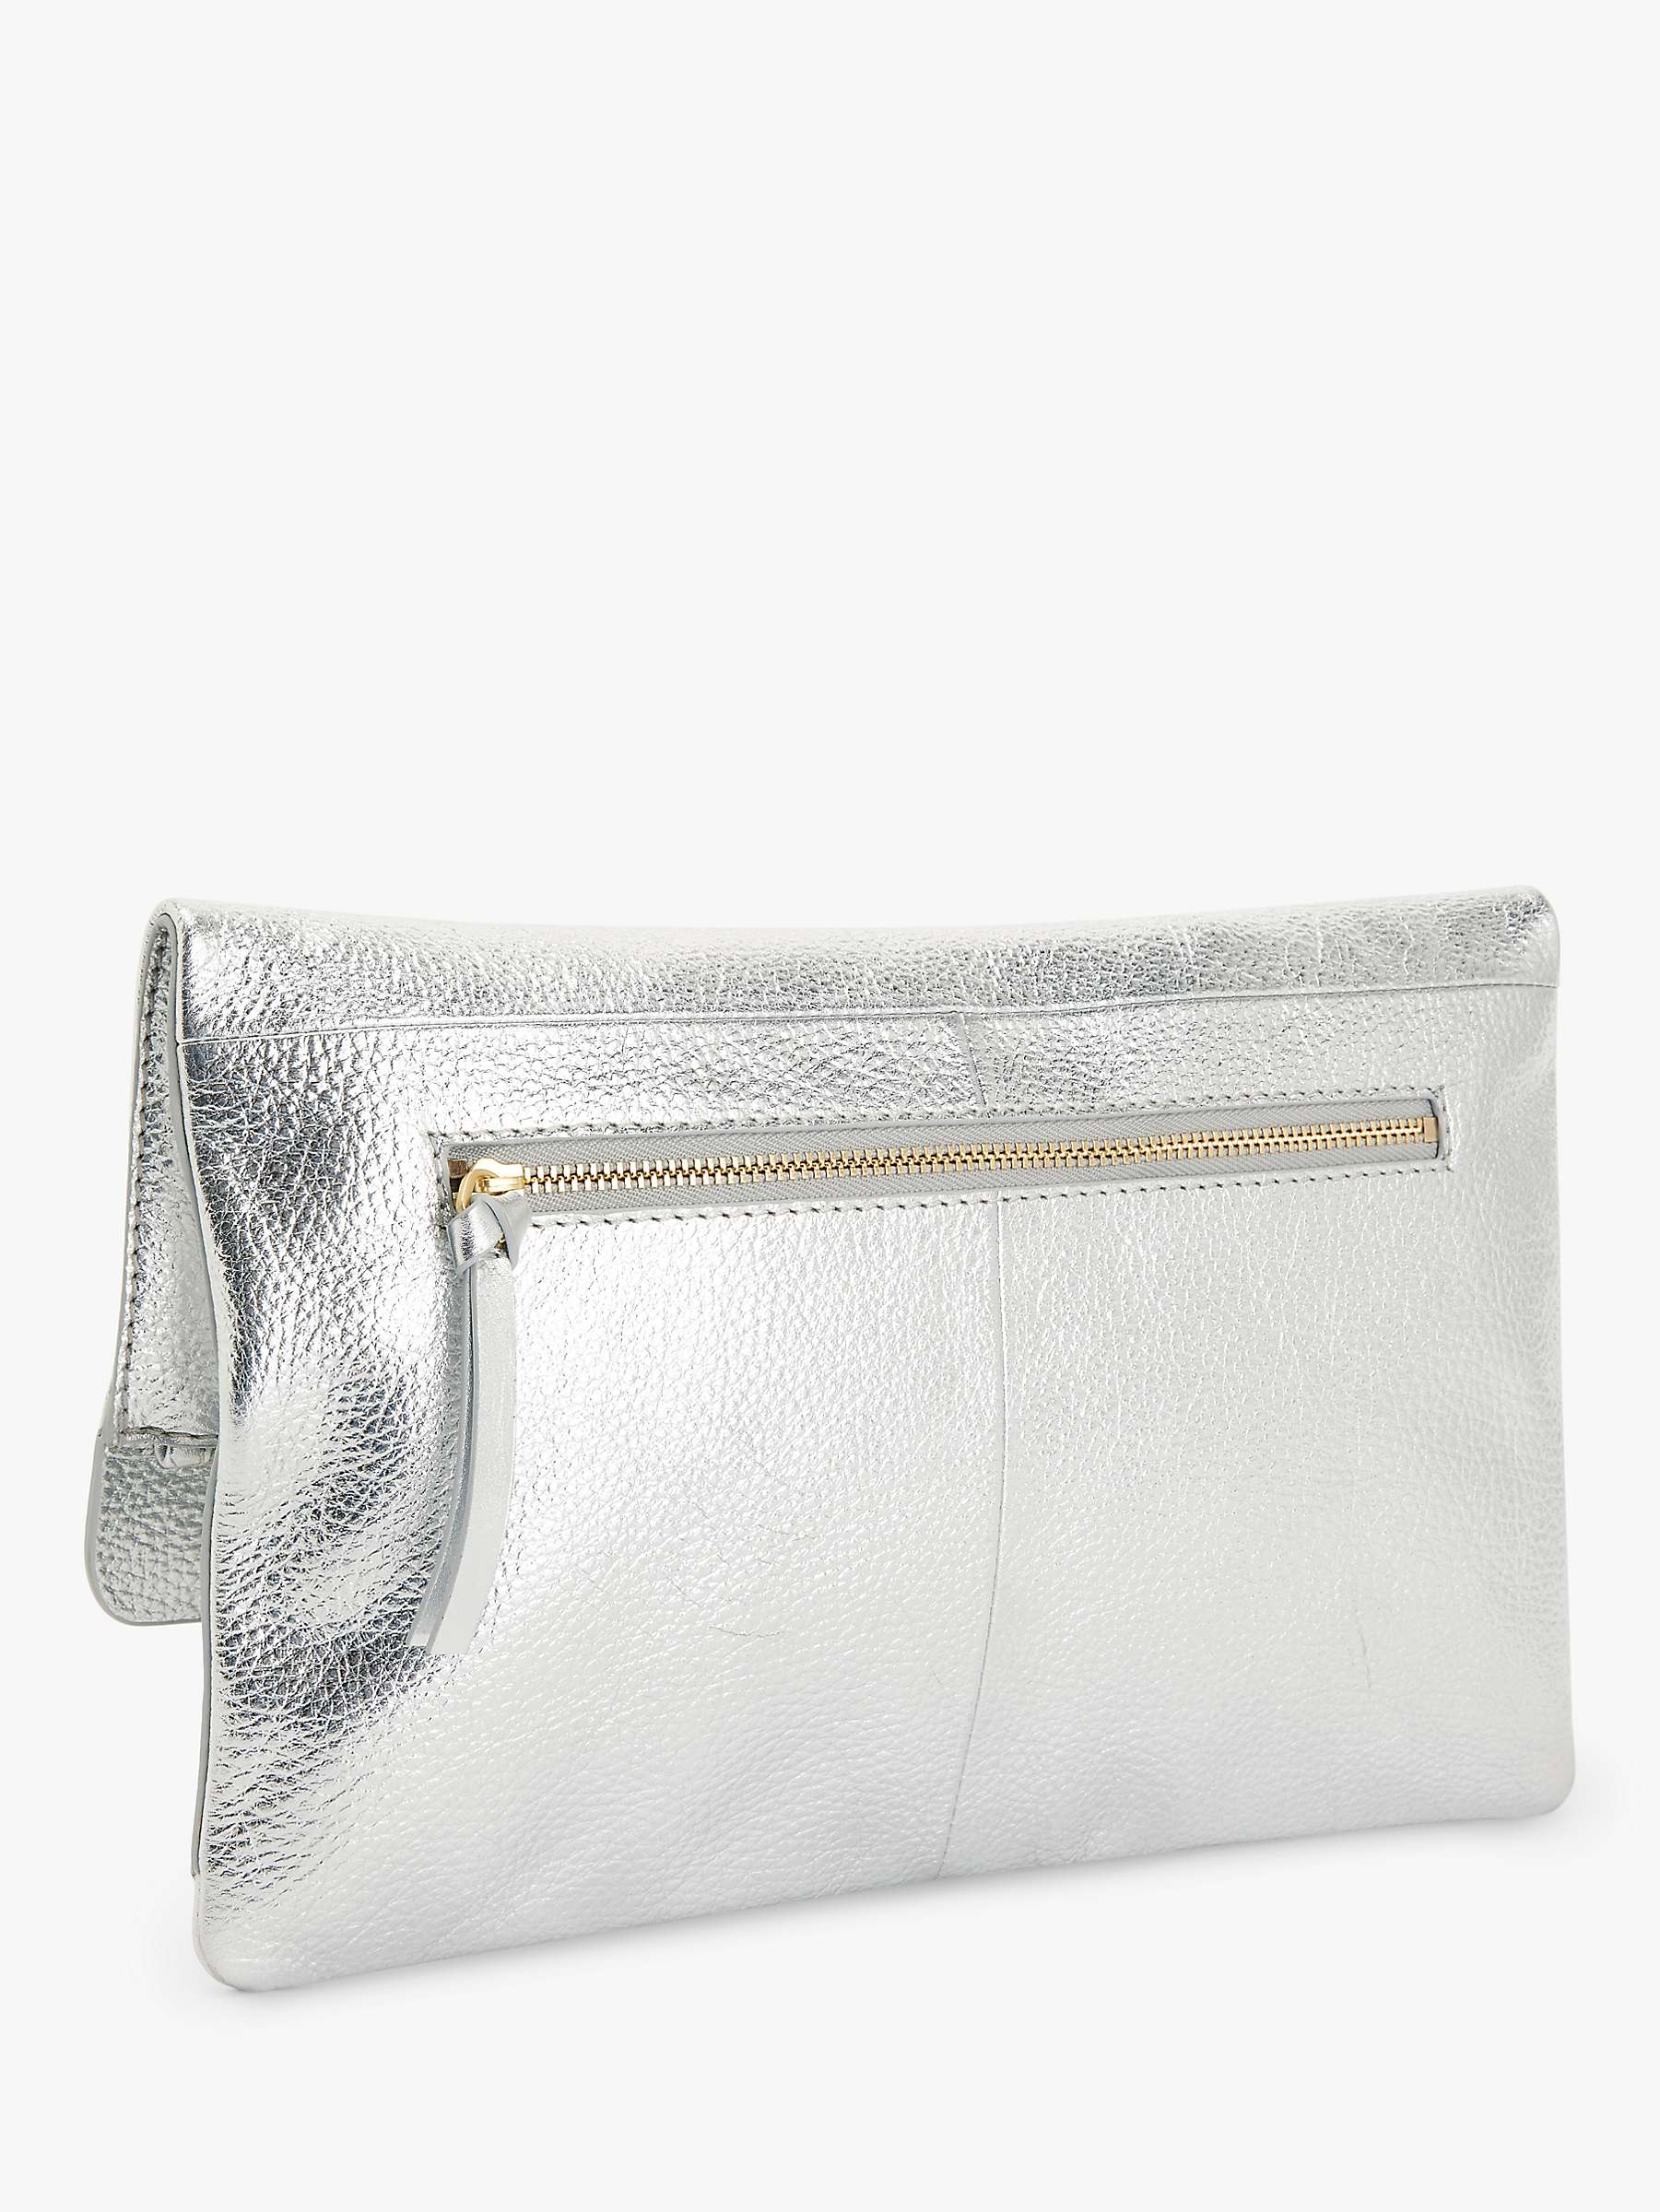 Buy John Lewis Mistry Leather Flapover Clutch Bag Online at johnlewis.com